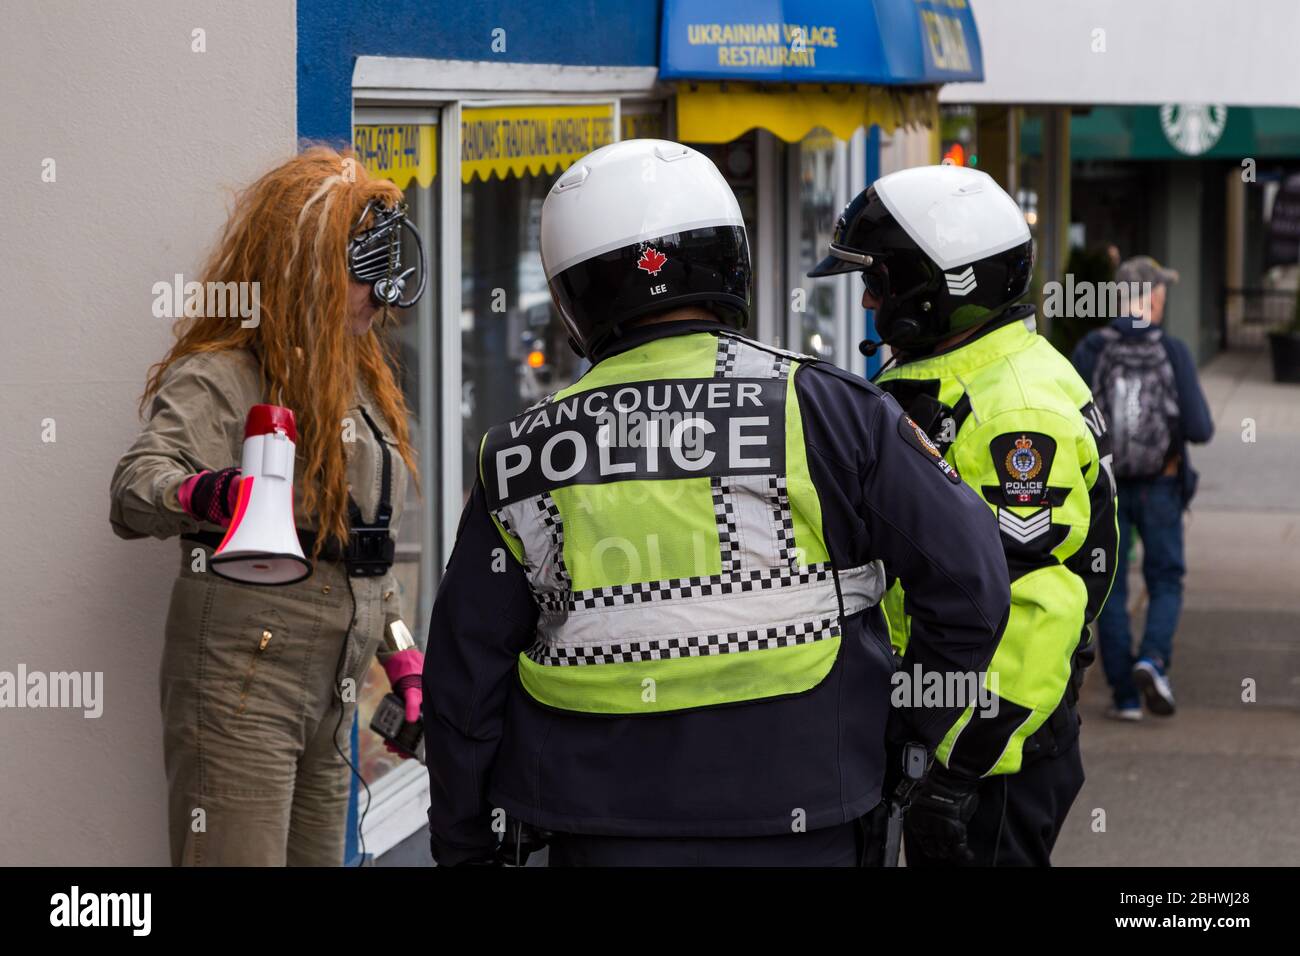 DOWNTOWN VANCOUVER, BC, CANADA - APR 26, 2020: Antifa member being detained by police at a anti lockdown protest. Stock Photo